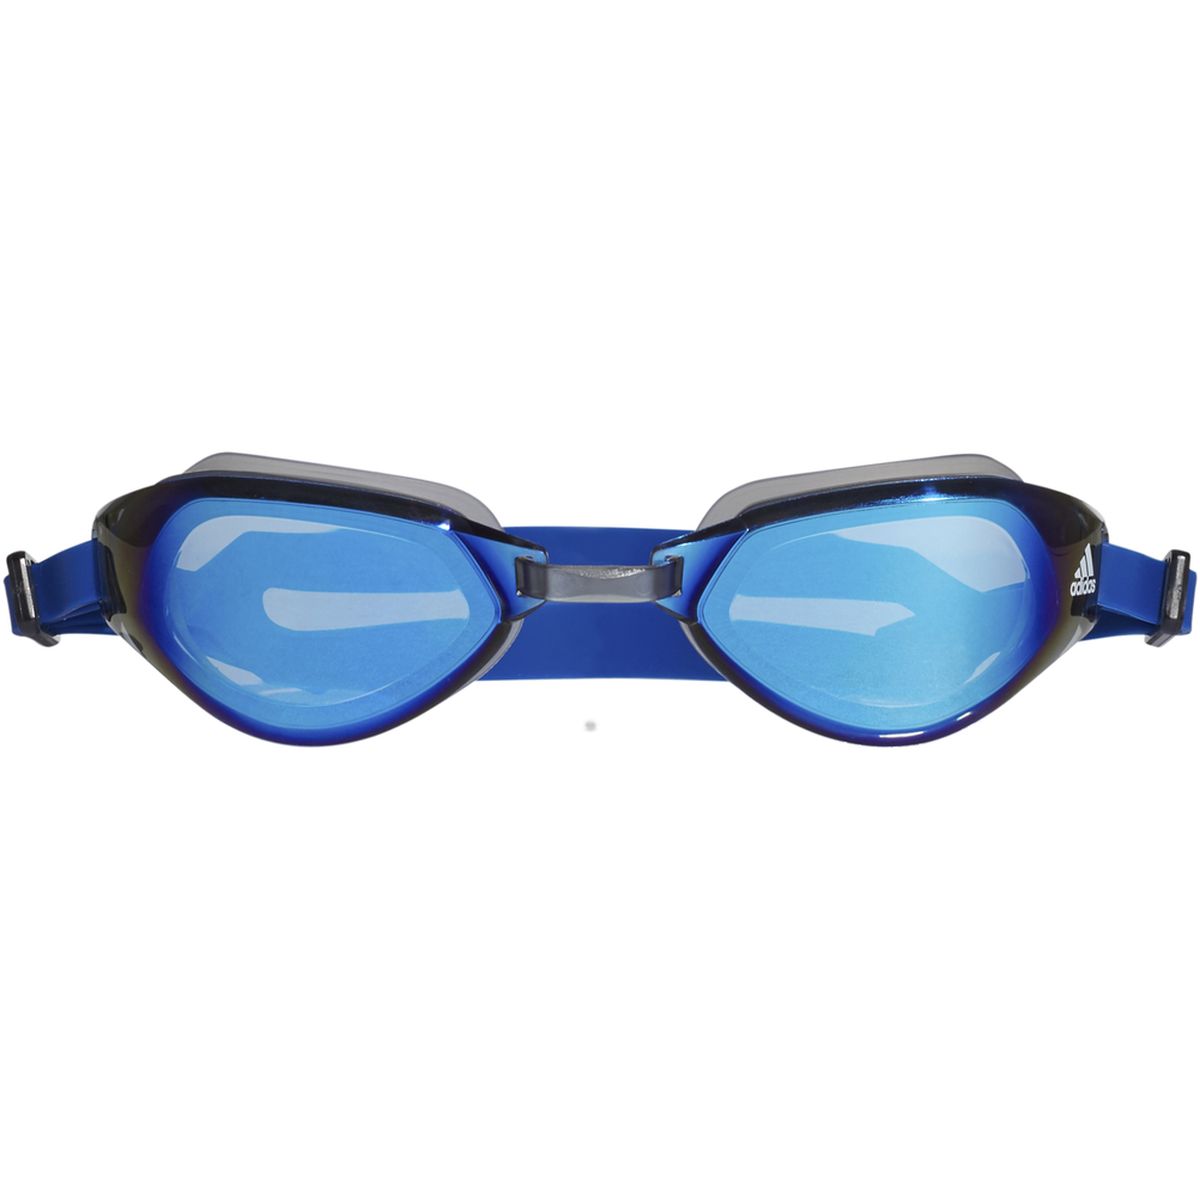 Adidas Persistar Fit Mirrored Schwimmbrille Unisex